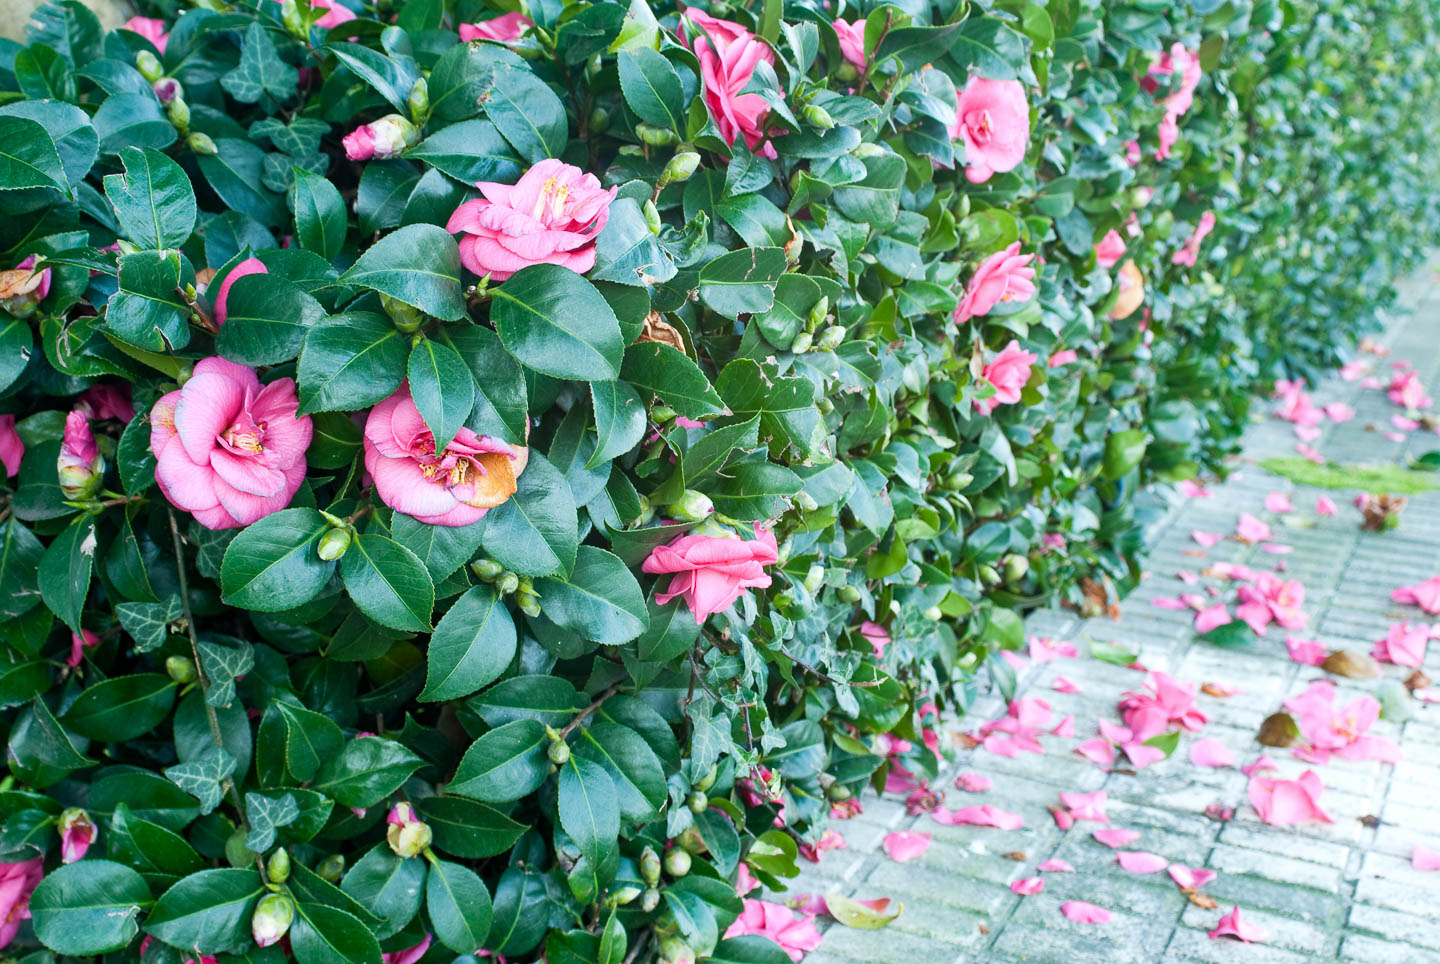 A clipped Camellia hedge with pink flowers